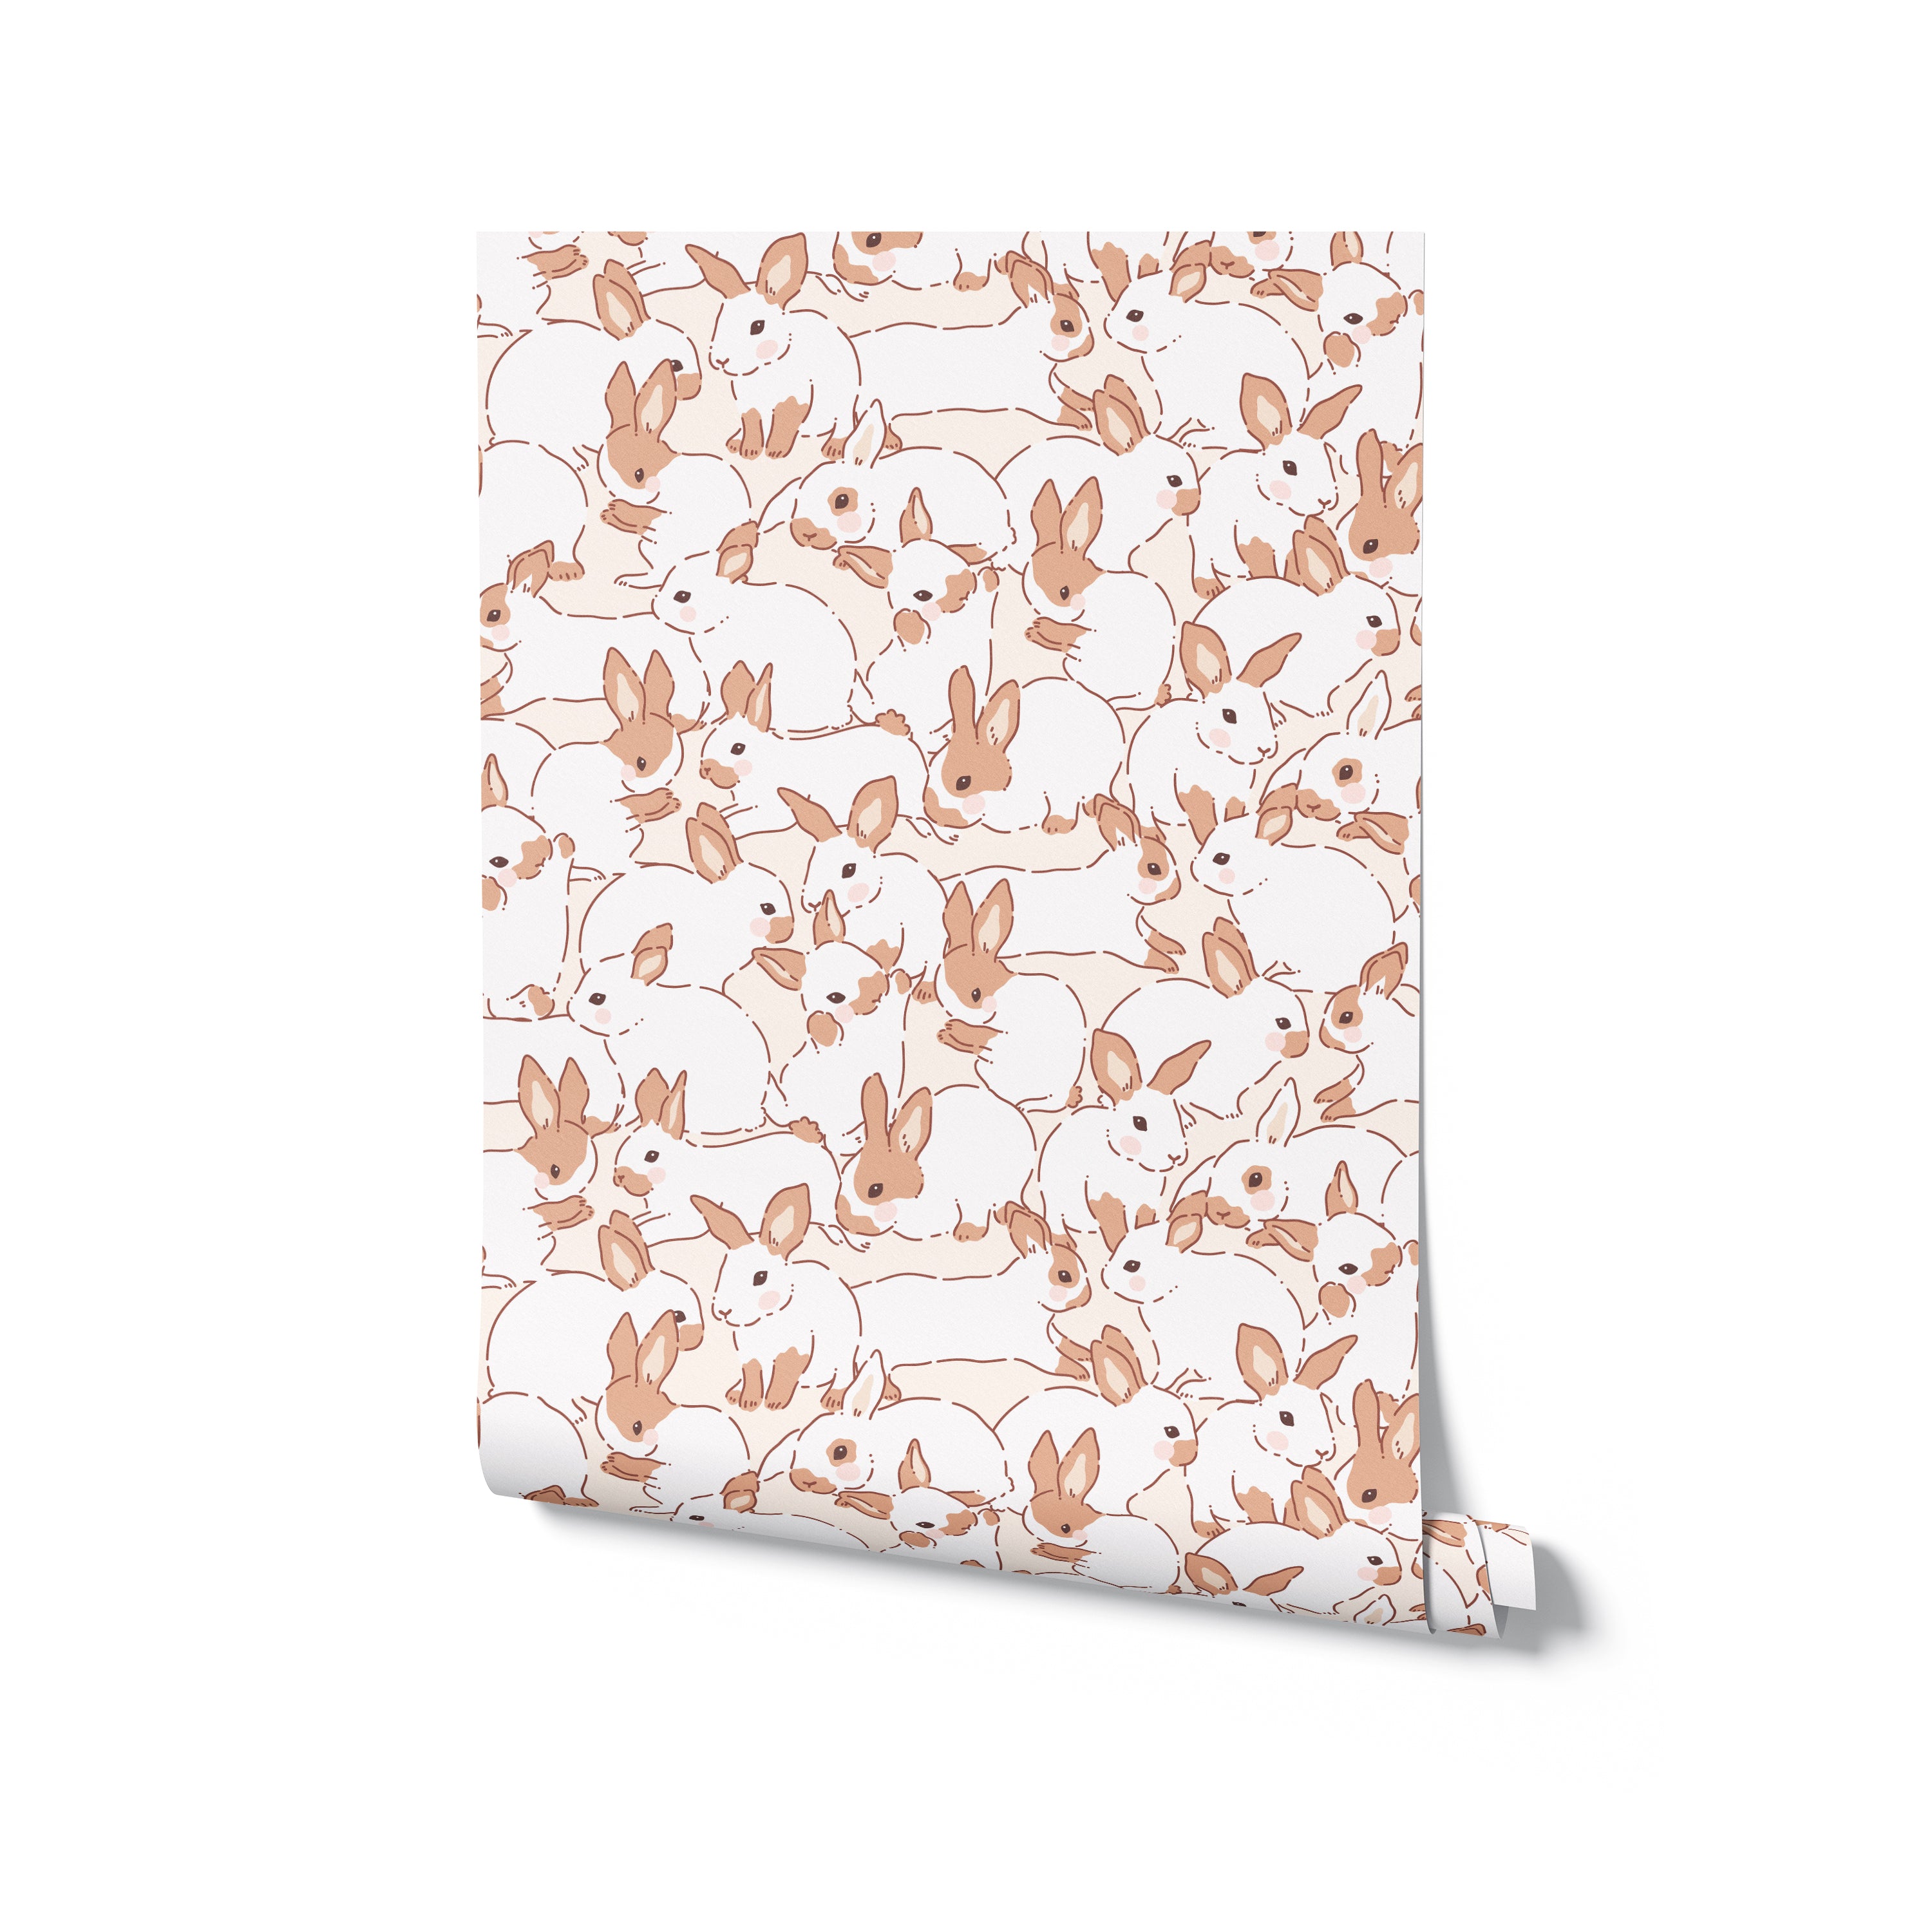  A roll of Lapinou Wallpaper displayed against a white background. The wallpaper features a repeating pattern of beige bunnies on a cream-colored backdrop, creating a soft and inviting design suitable for various spaces.